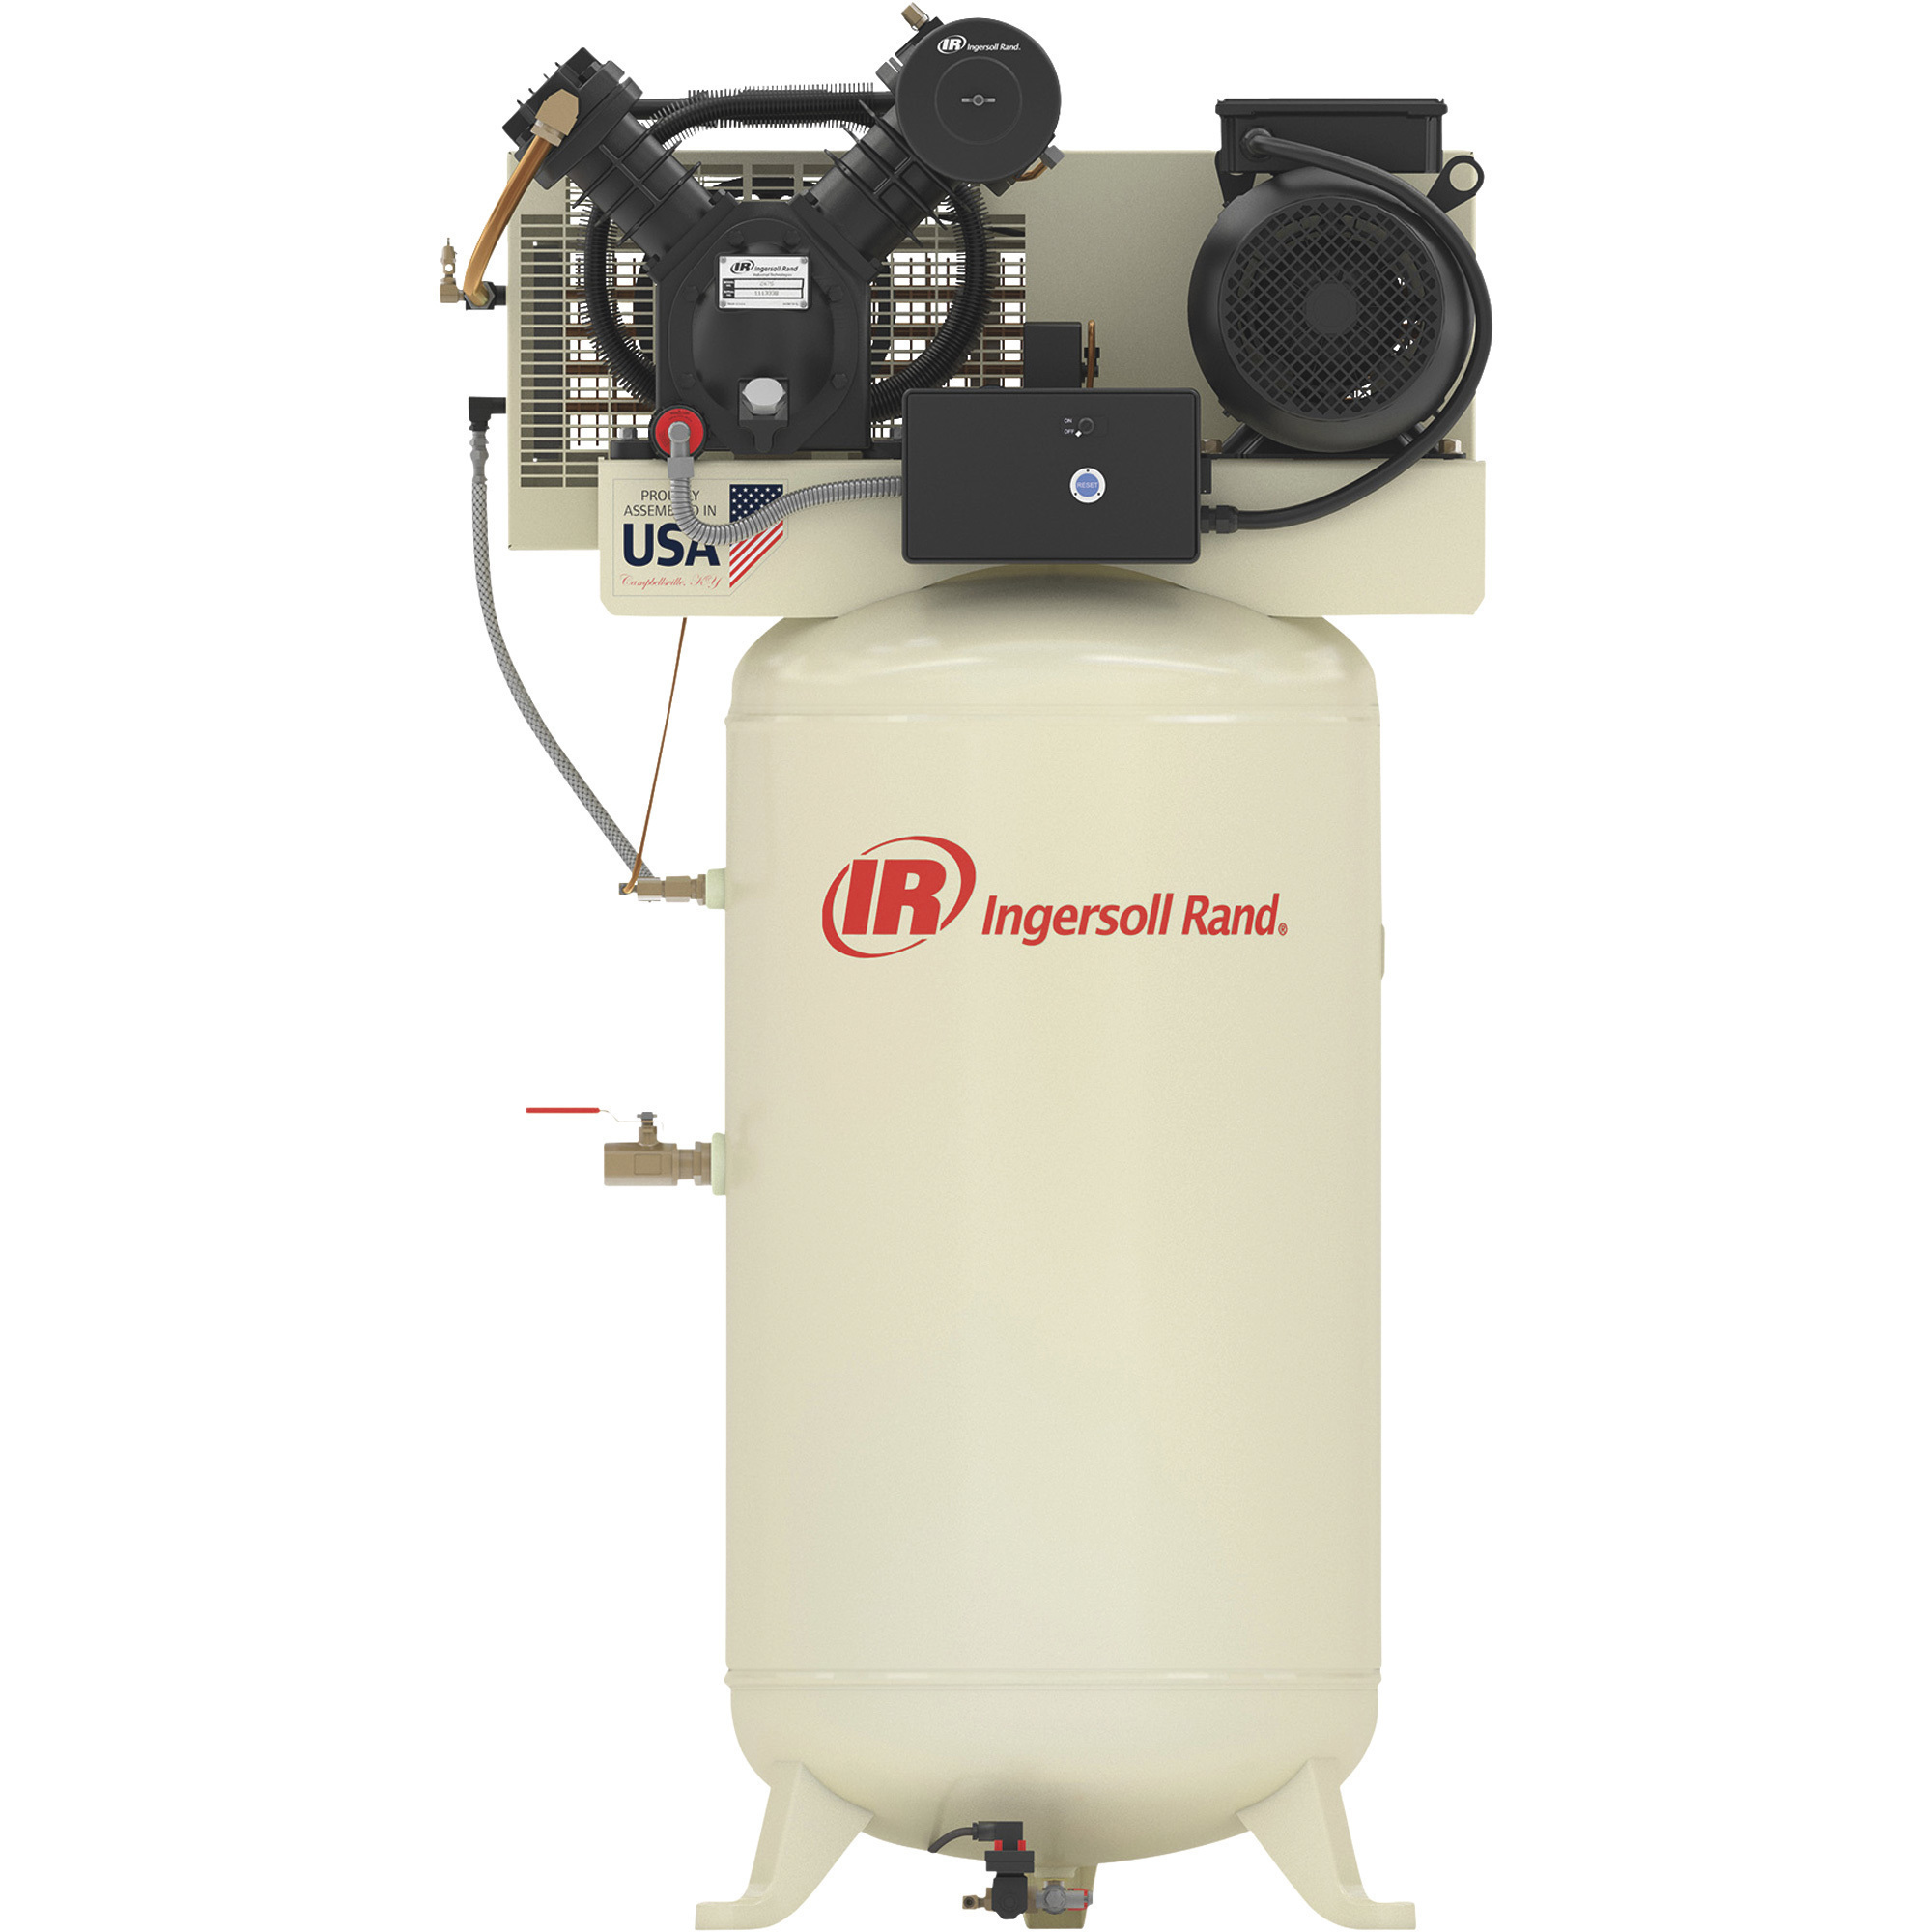 Ingersoll Rand Type-30 Reciprocating Air Compressor (Premium Package), 7.5 HP, 200 Volt, 3 Phase, 80 Gallon Vertical, Model 2475N7.5-P